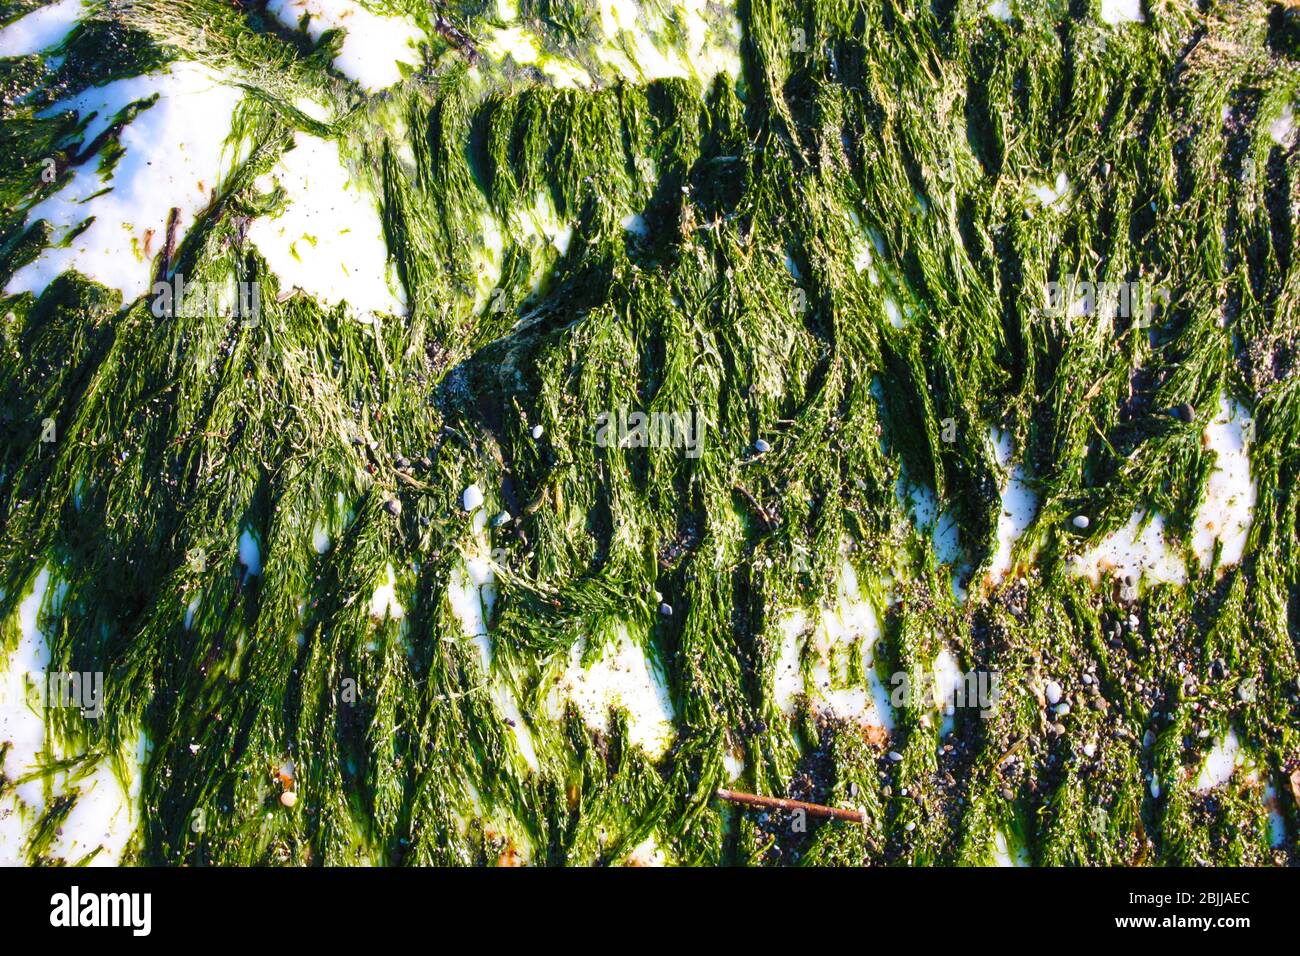 seaweed and slimy green moss on a white rock in the wildlife Stock Photo